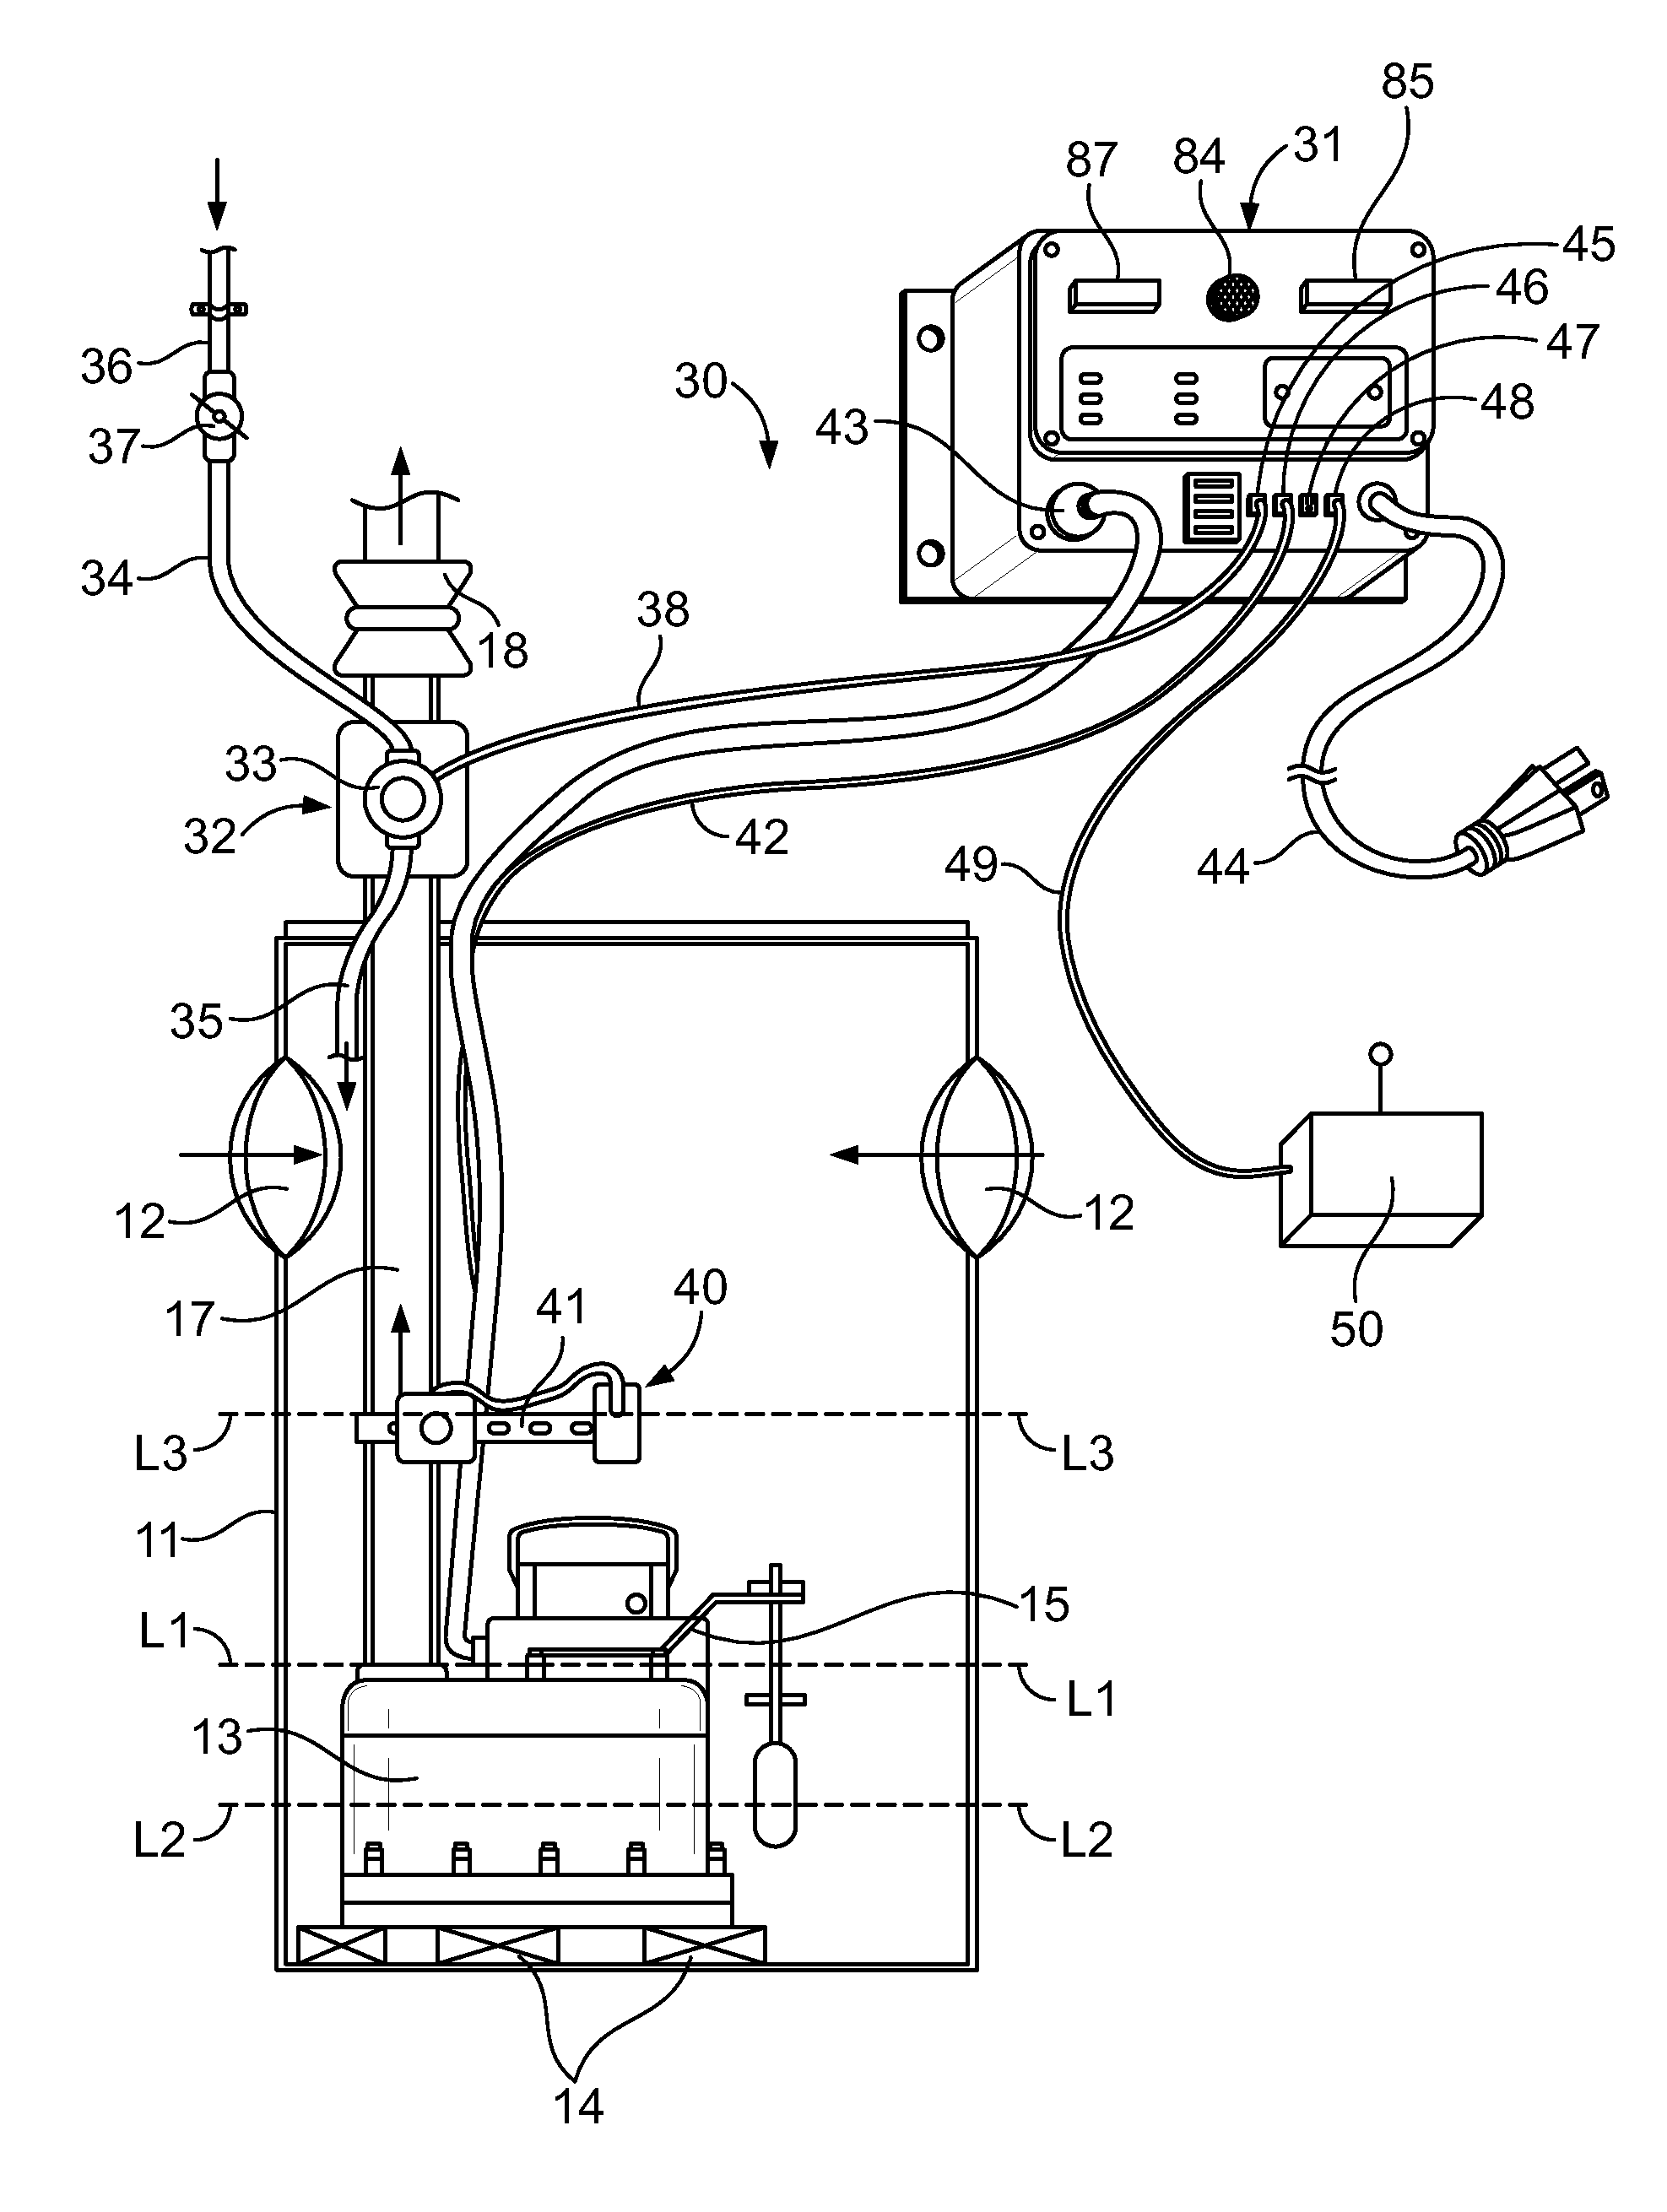 Test and monitoring system for a sump pump installation having a self-monitoring liquid level sensing module